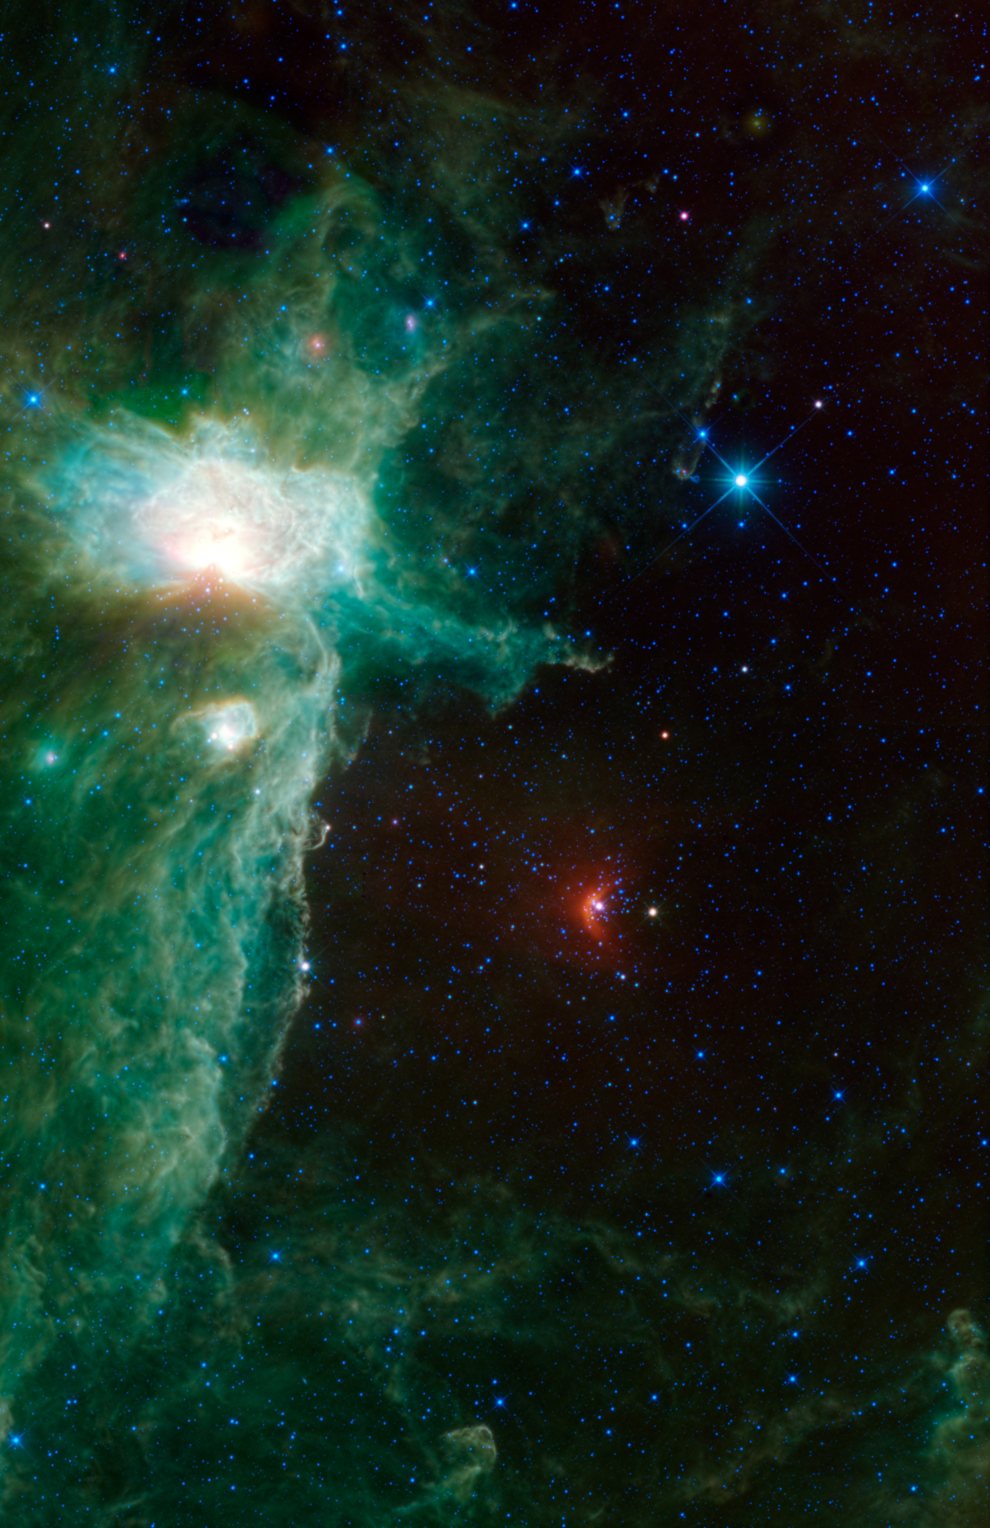 Flame+Horse Head+NGC2023 nebulae in Orion_far Infra-red_5July2012_Wide field Infrared Survey Explorer (WISE)_NASA_JPL_Caltech_990w